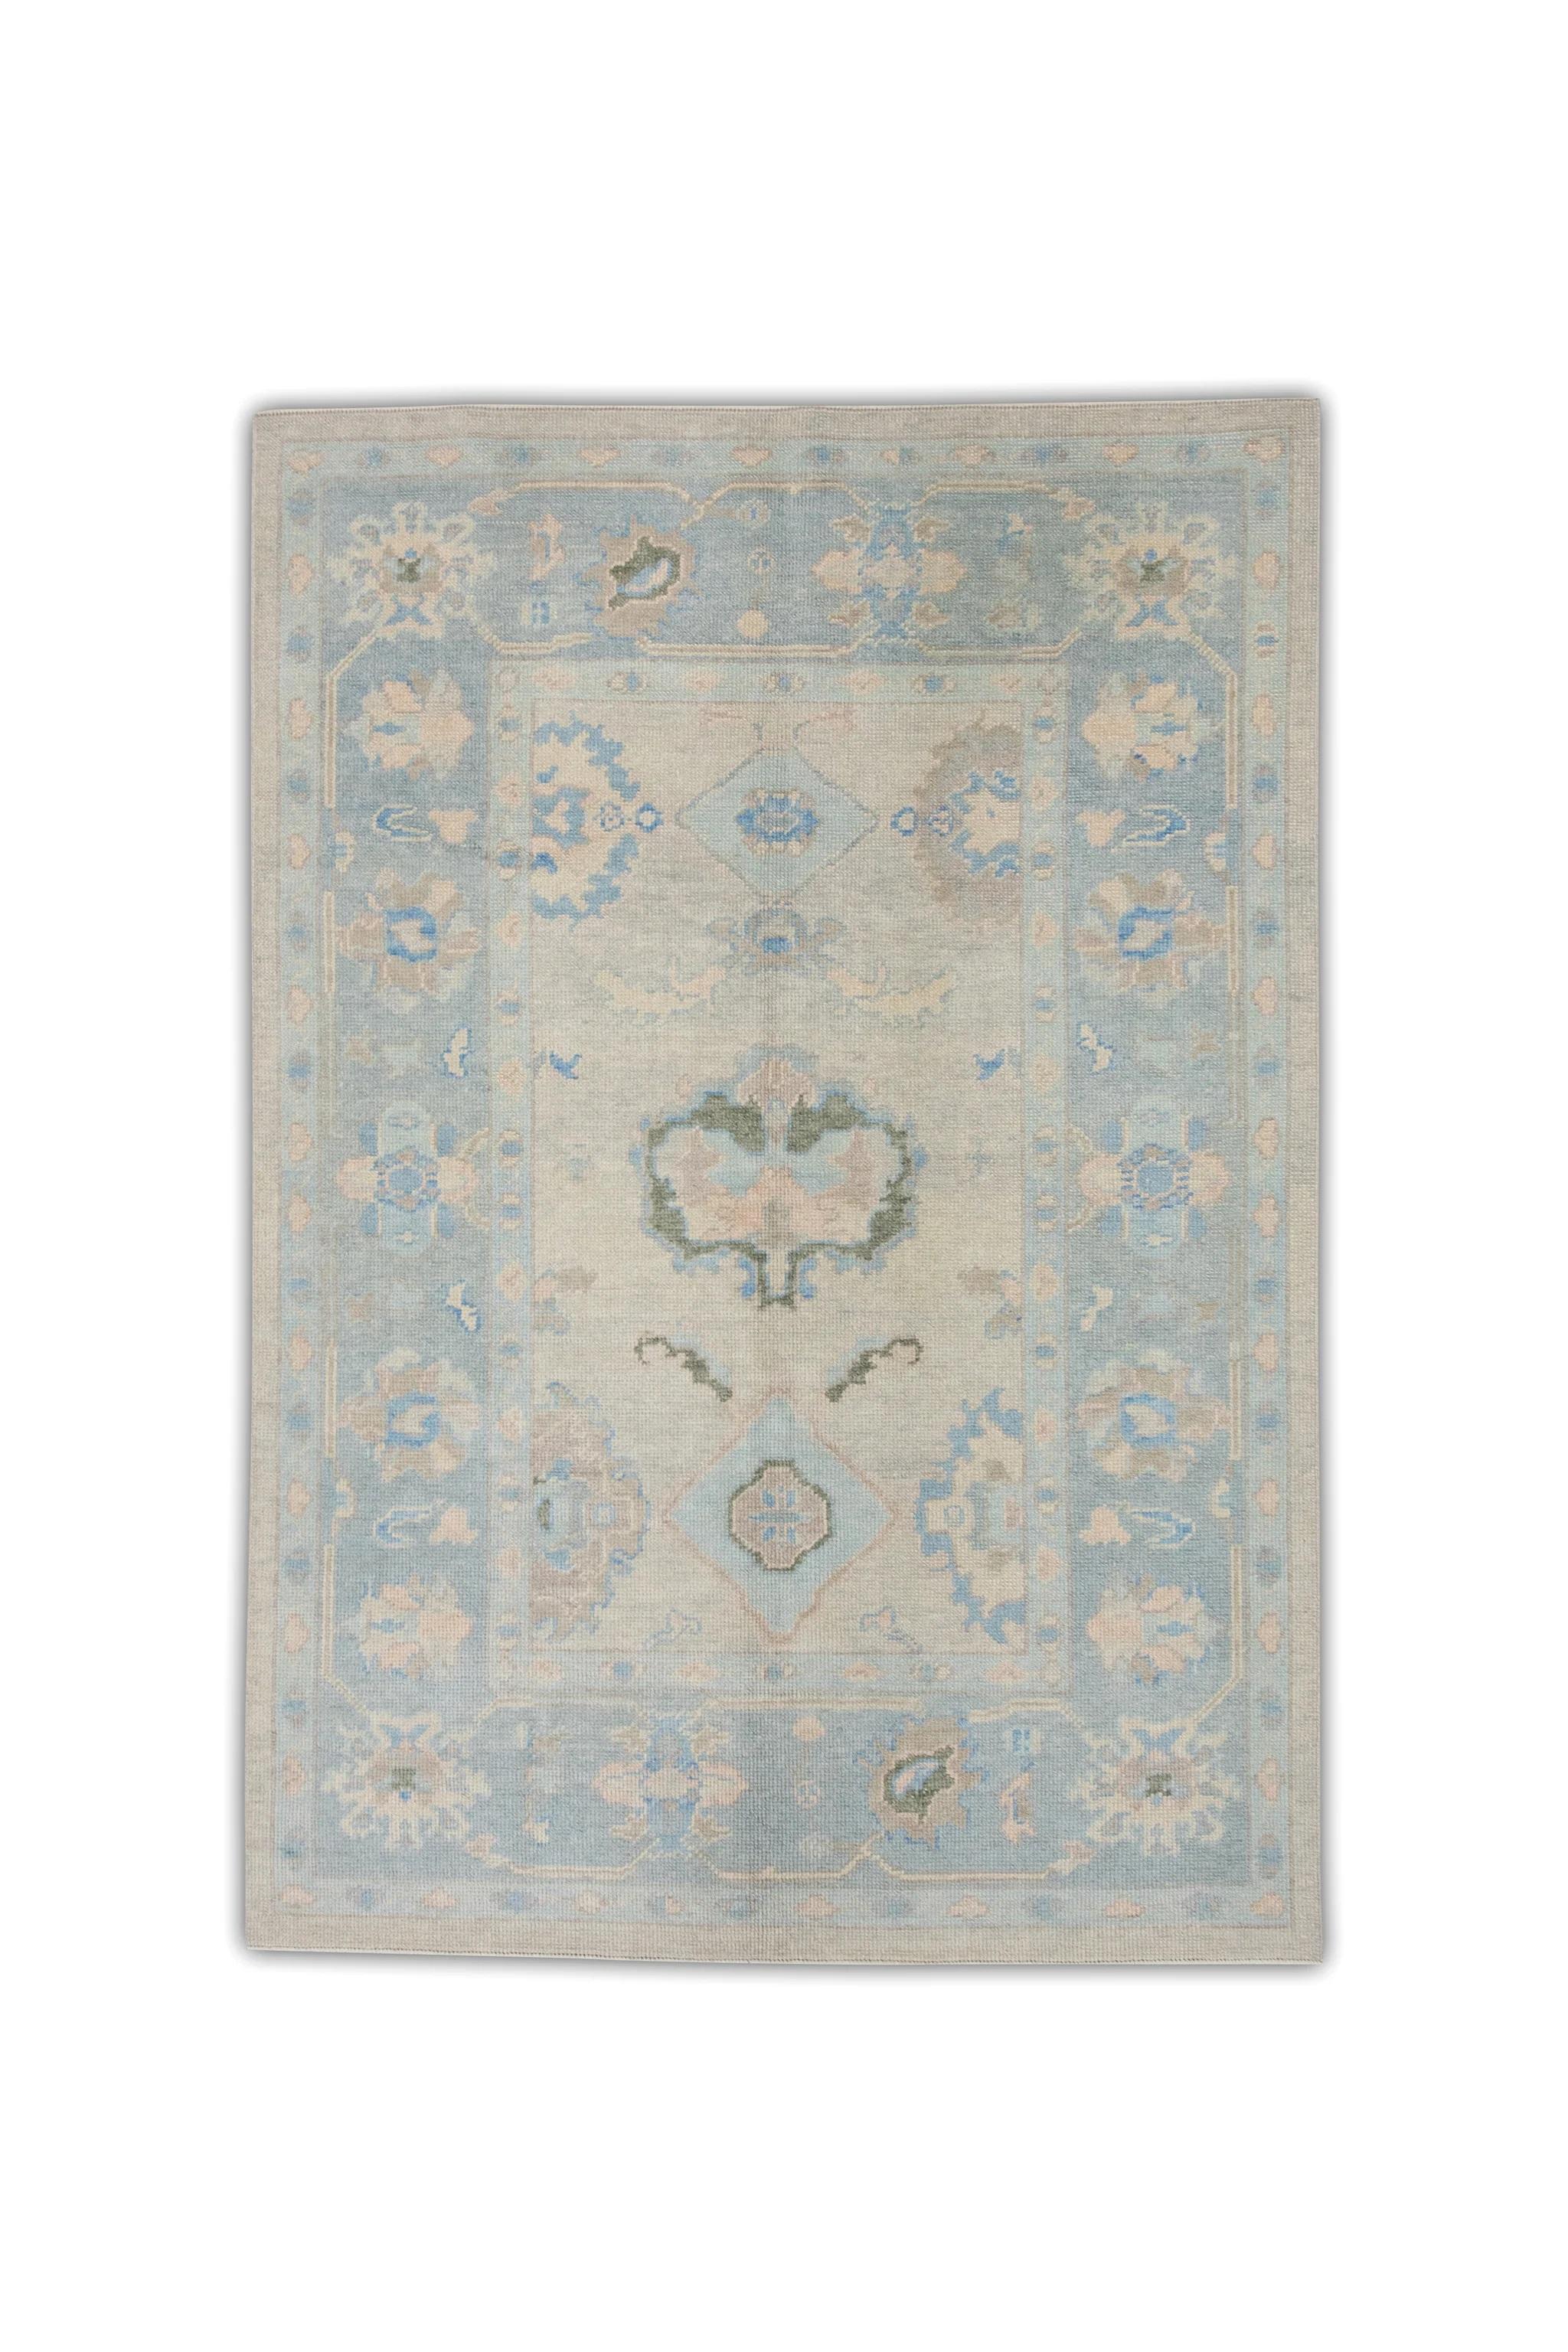 Blue and Pink Floral Handwoven Wool Turkish Oushak Rug 5'1